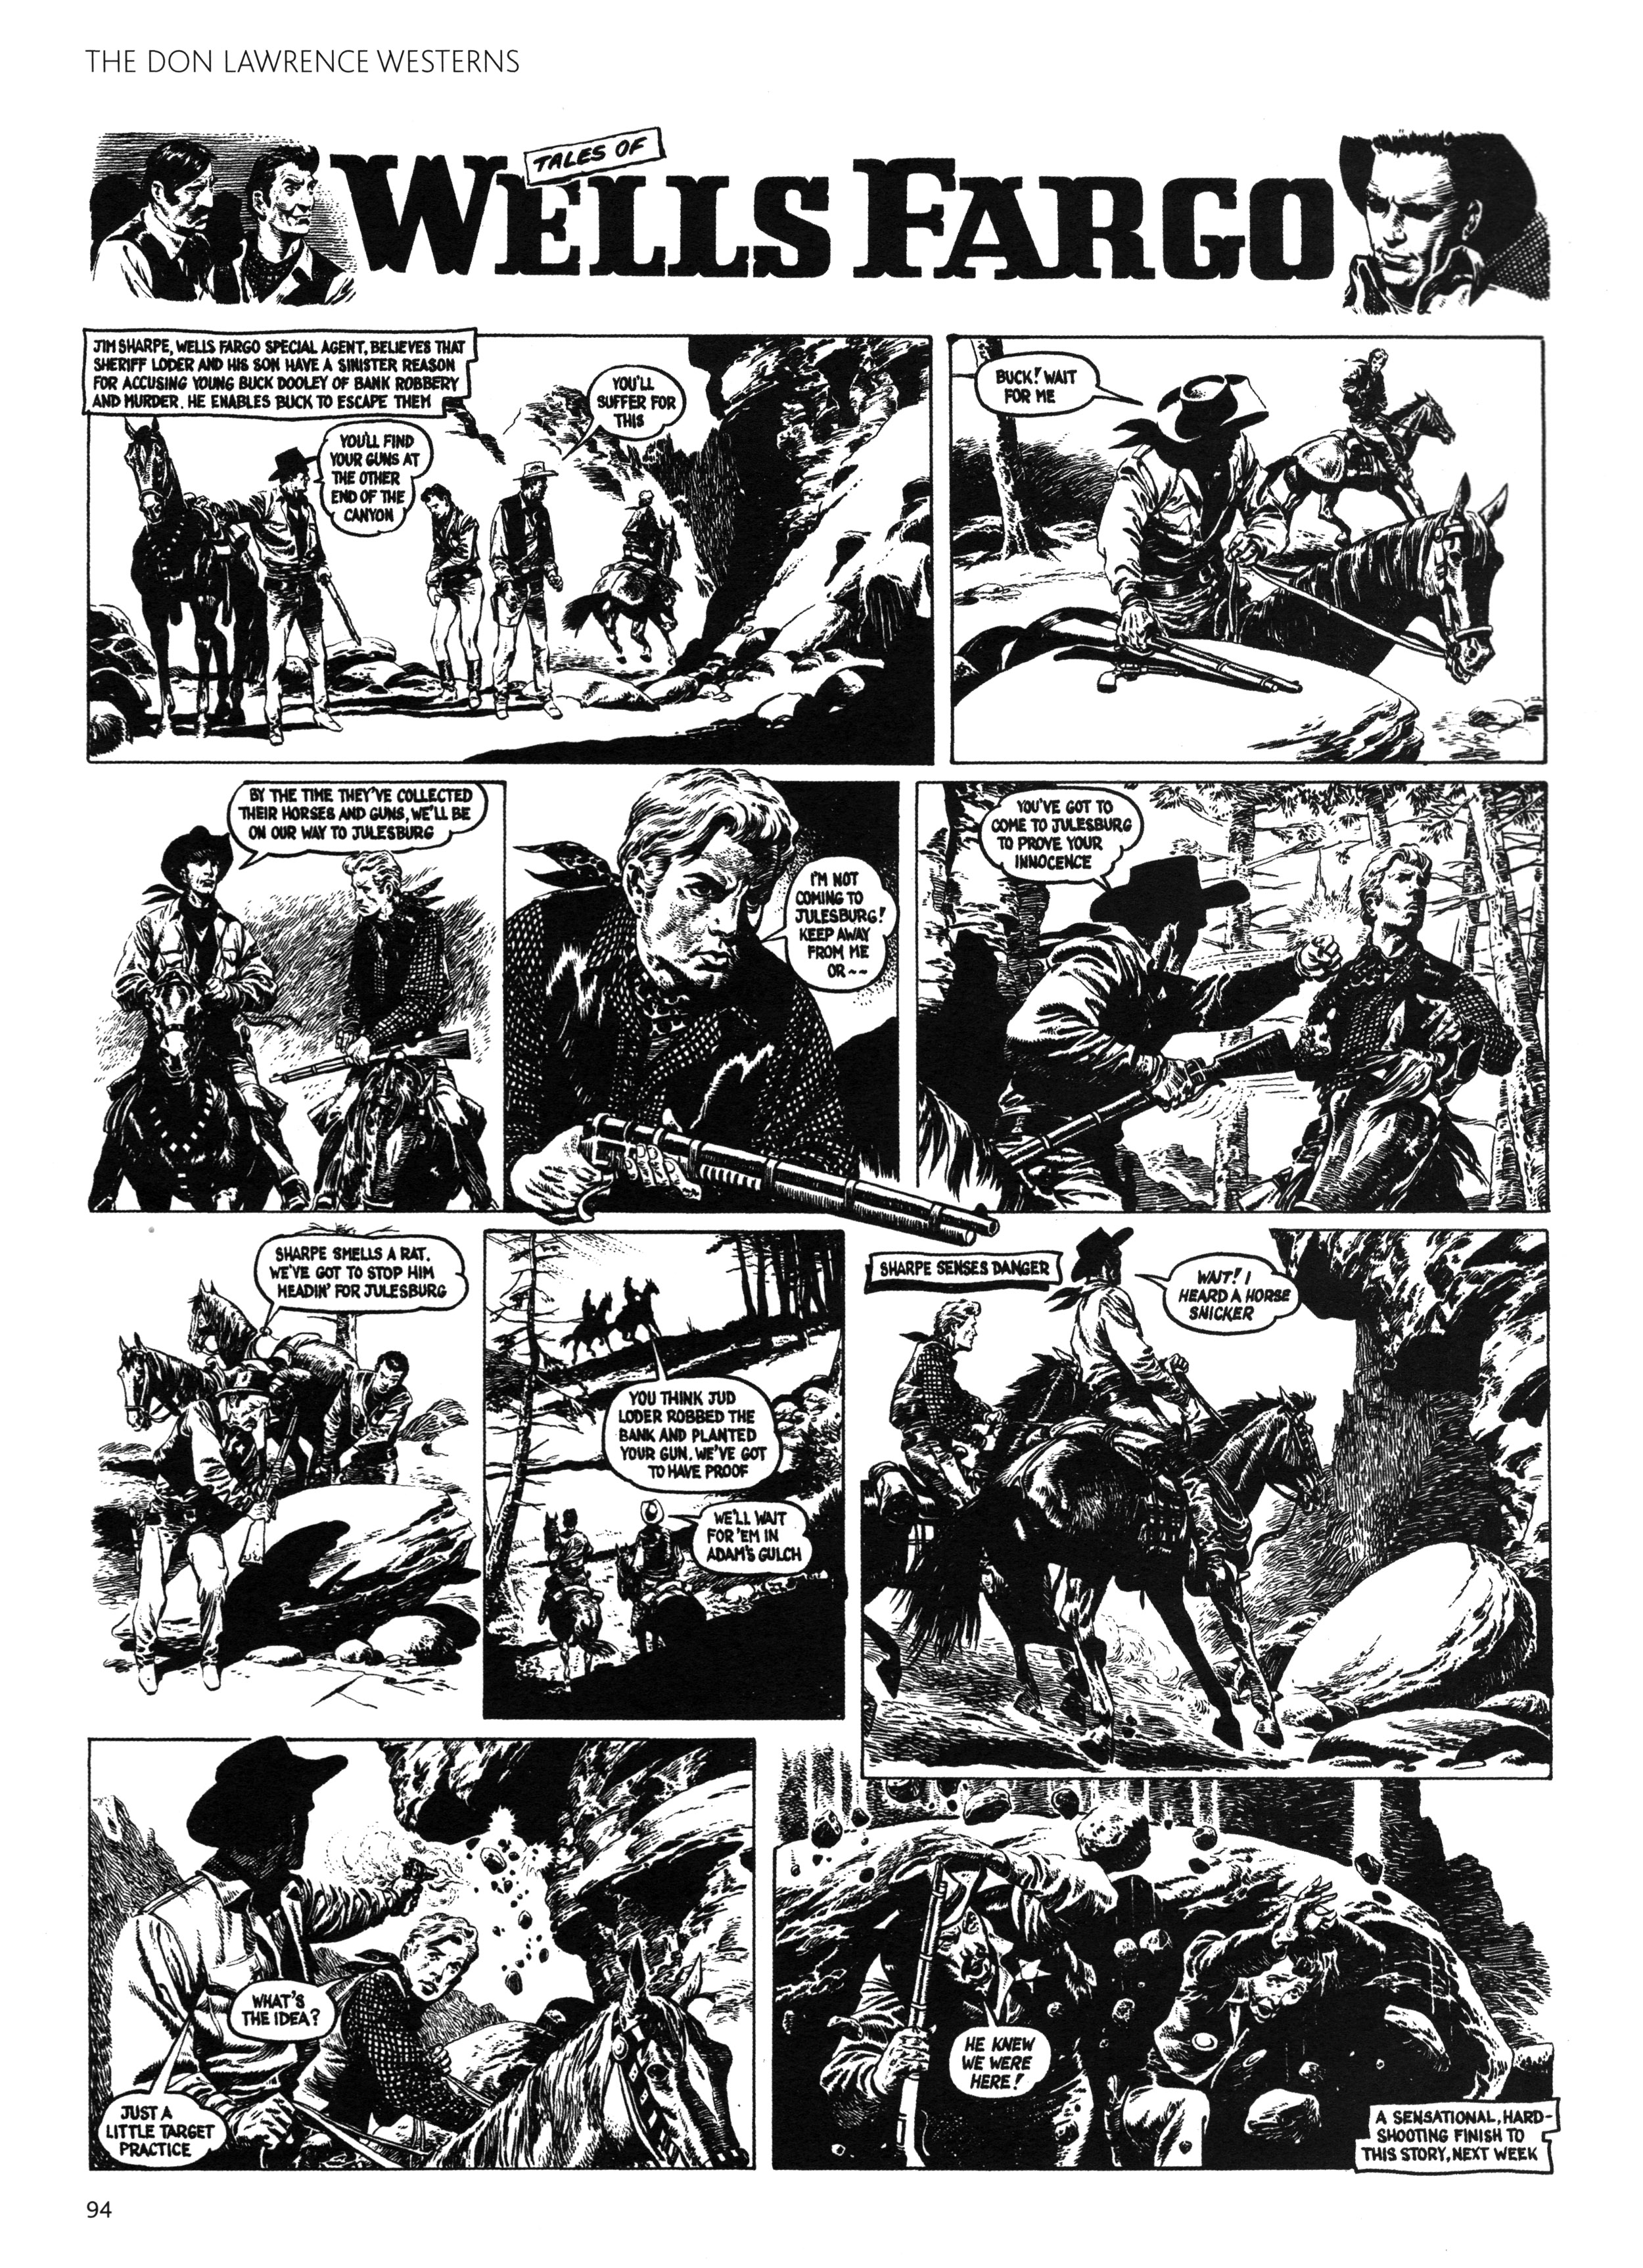 Read online Don Lawrence Westerns comic -  Issue # TPB (Part 1) - 98